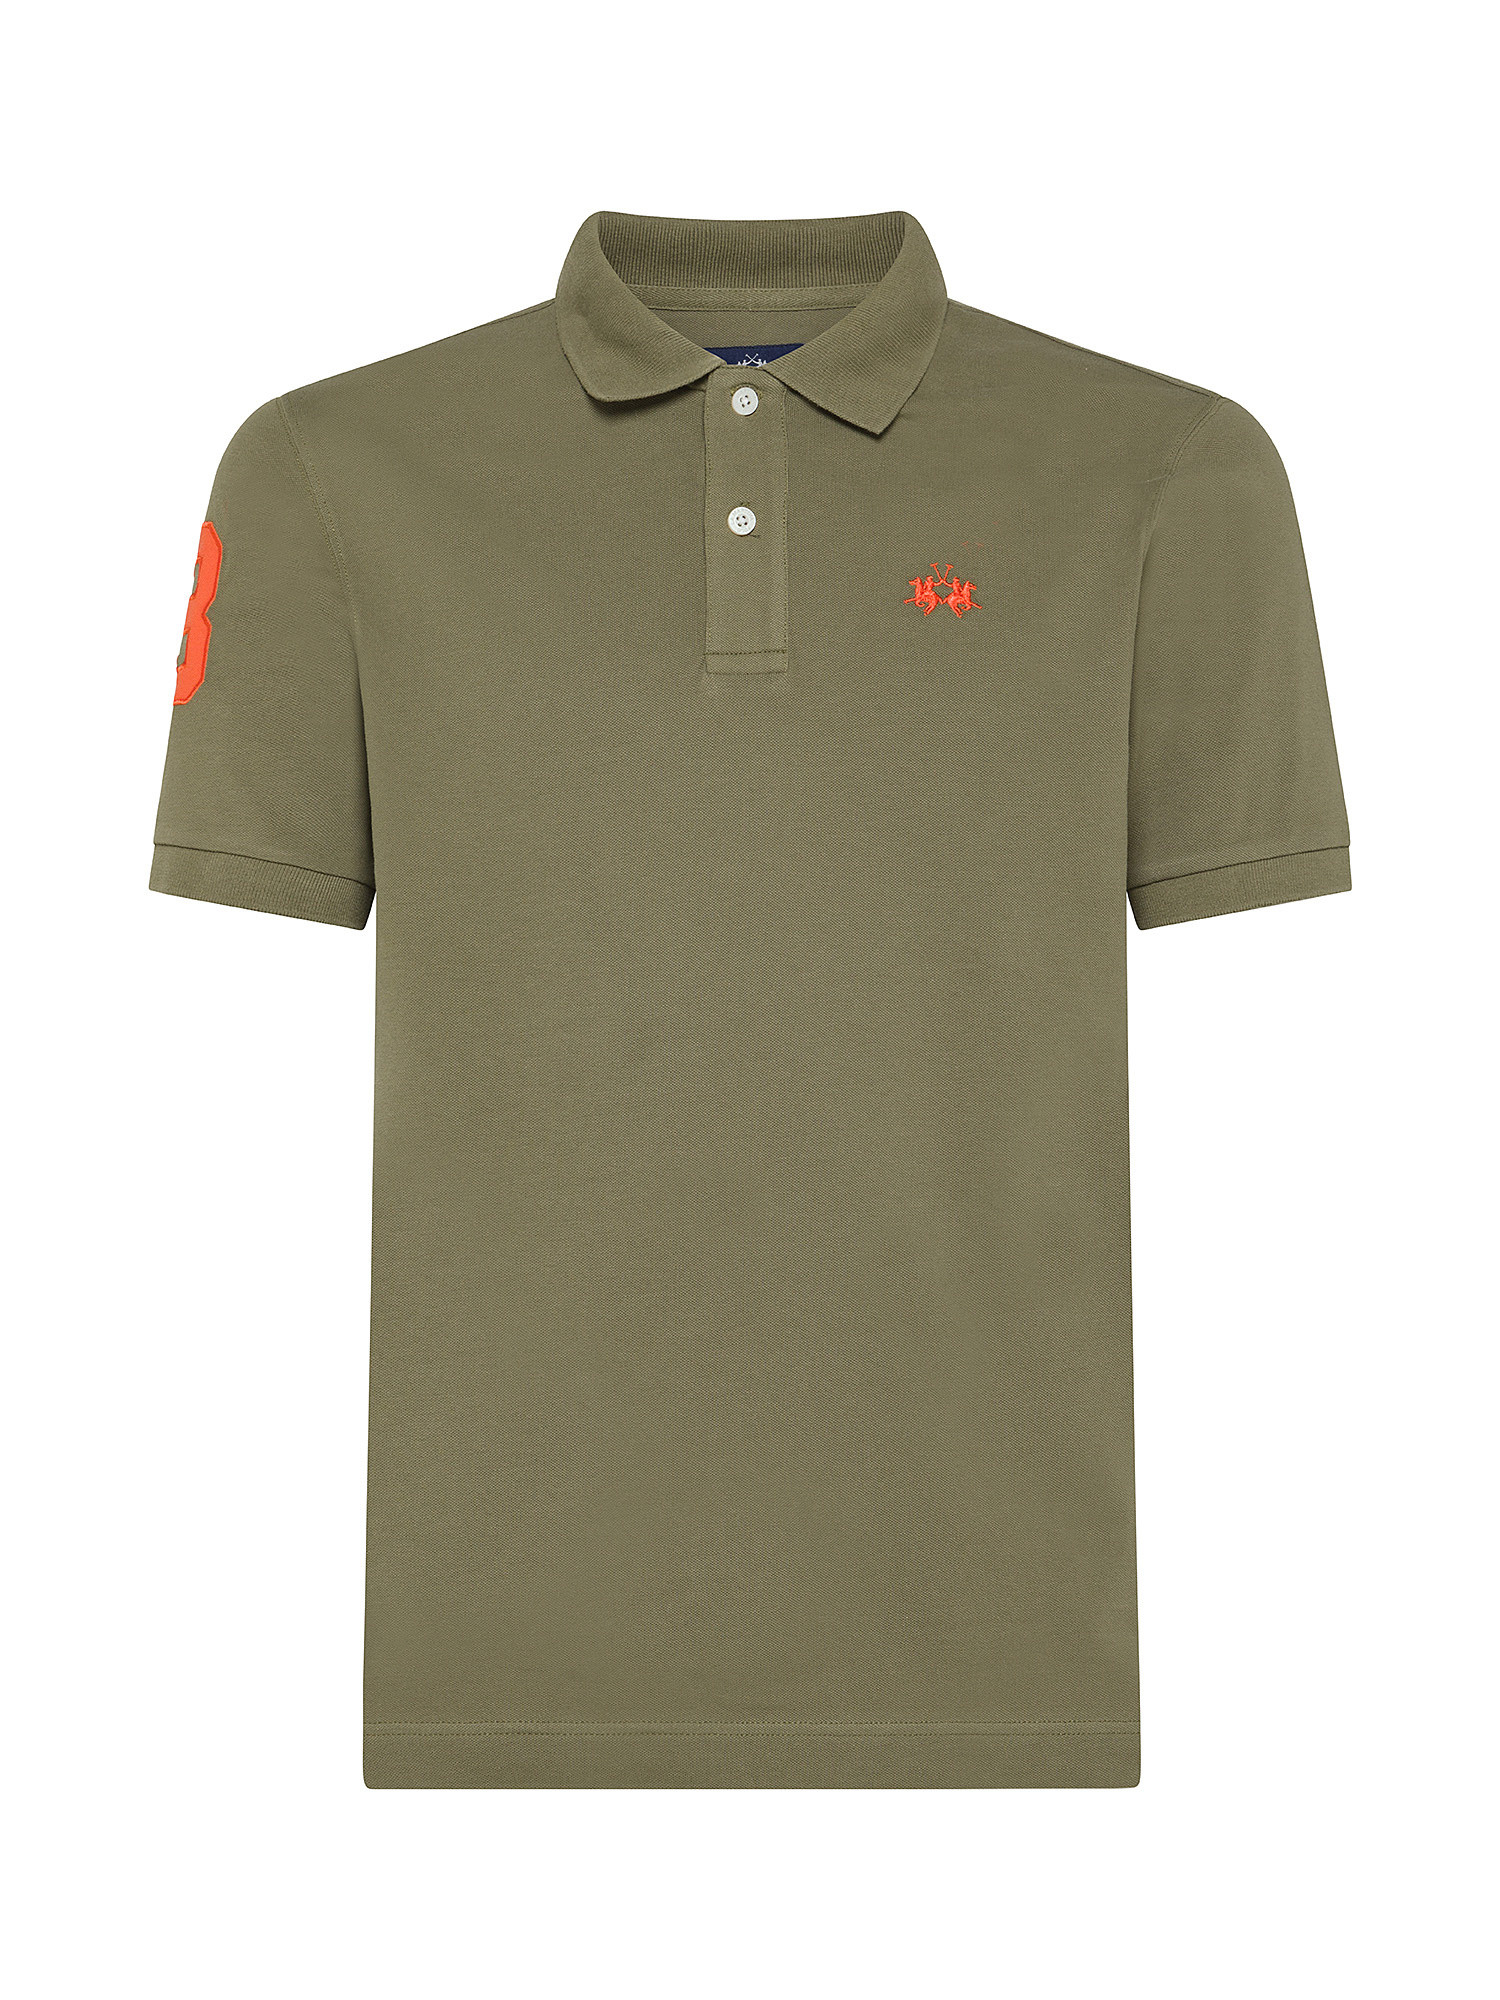 La Martina - Short-sleeved polo shirt in stretch piqué, Green, large image number 0